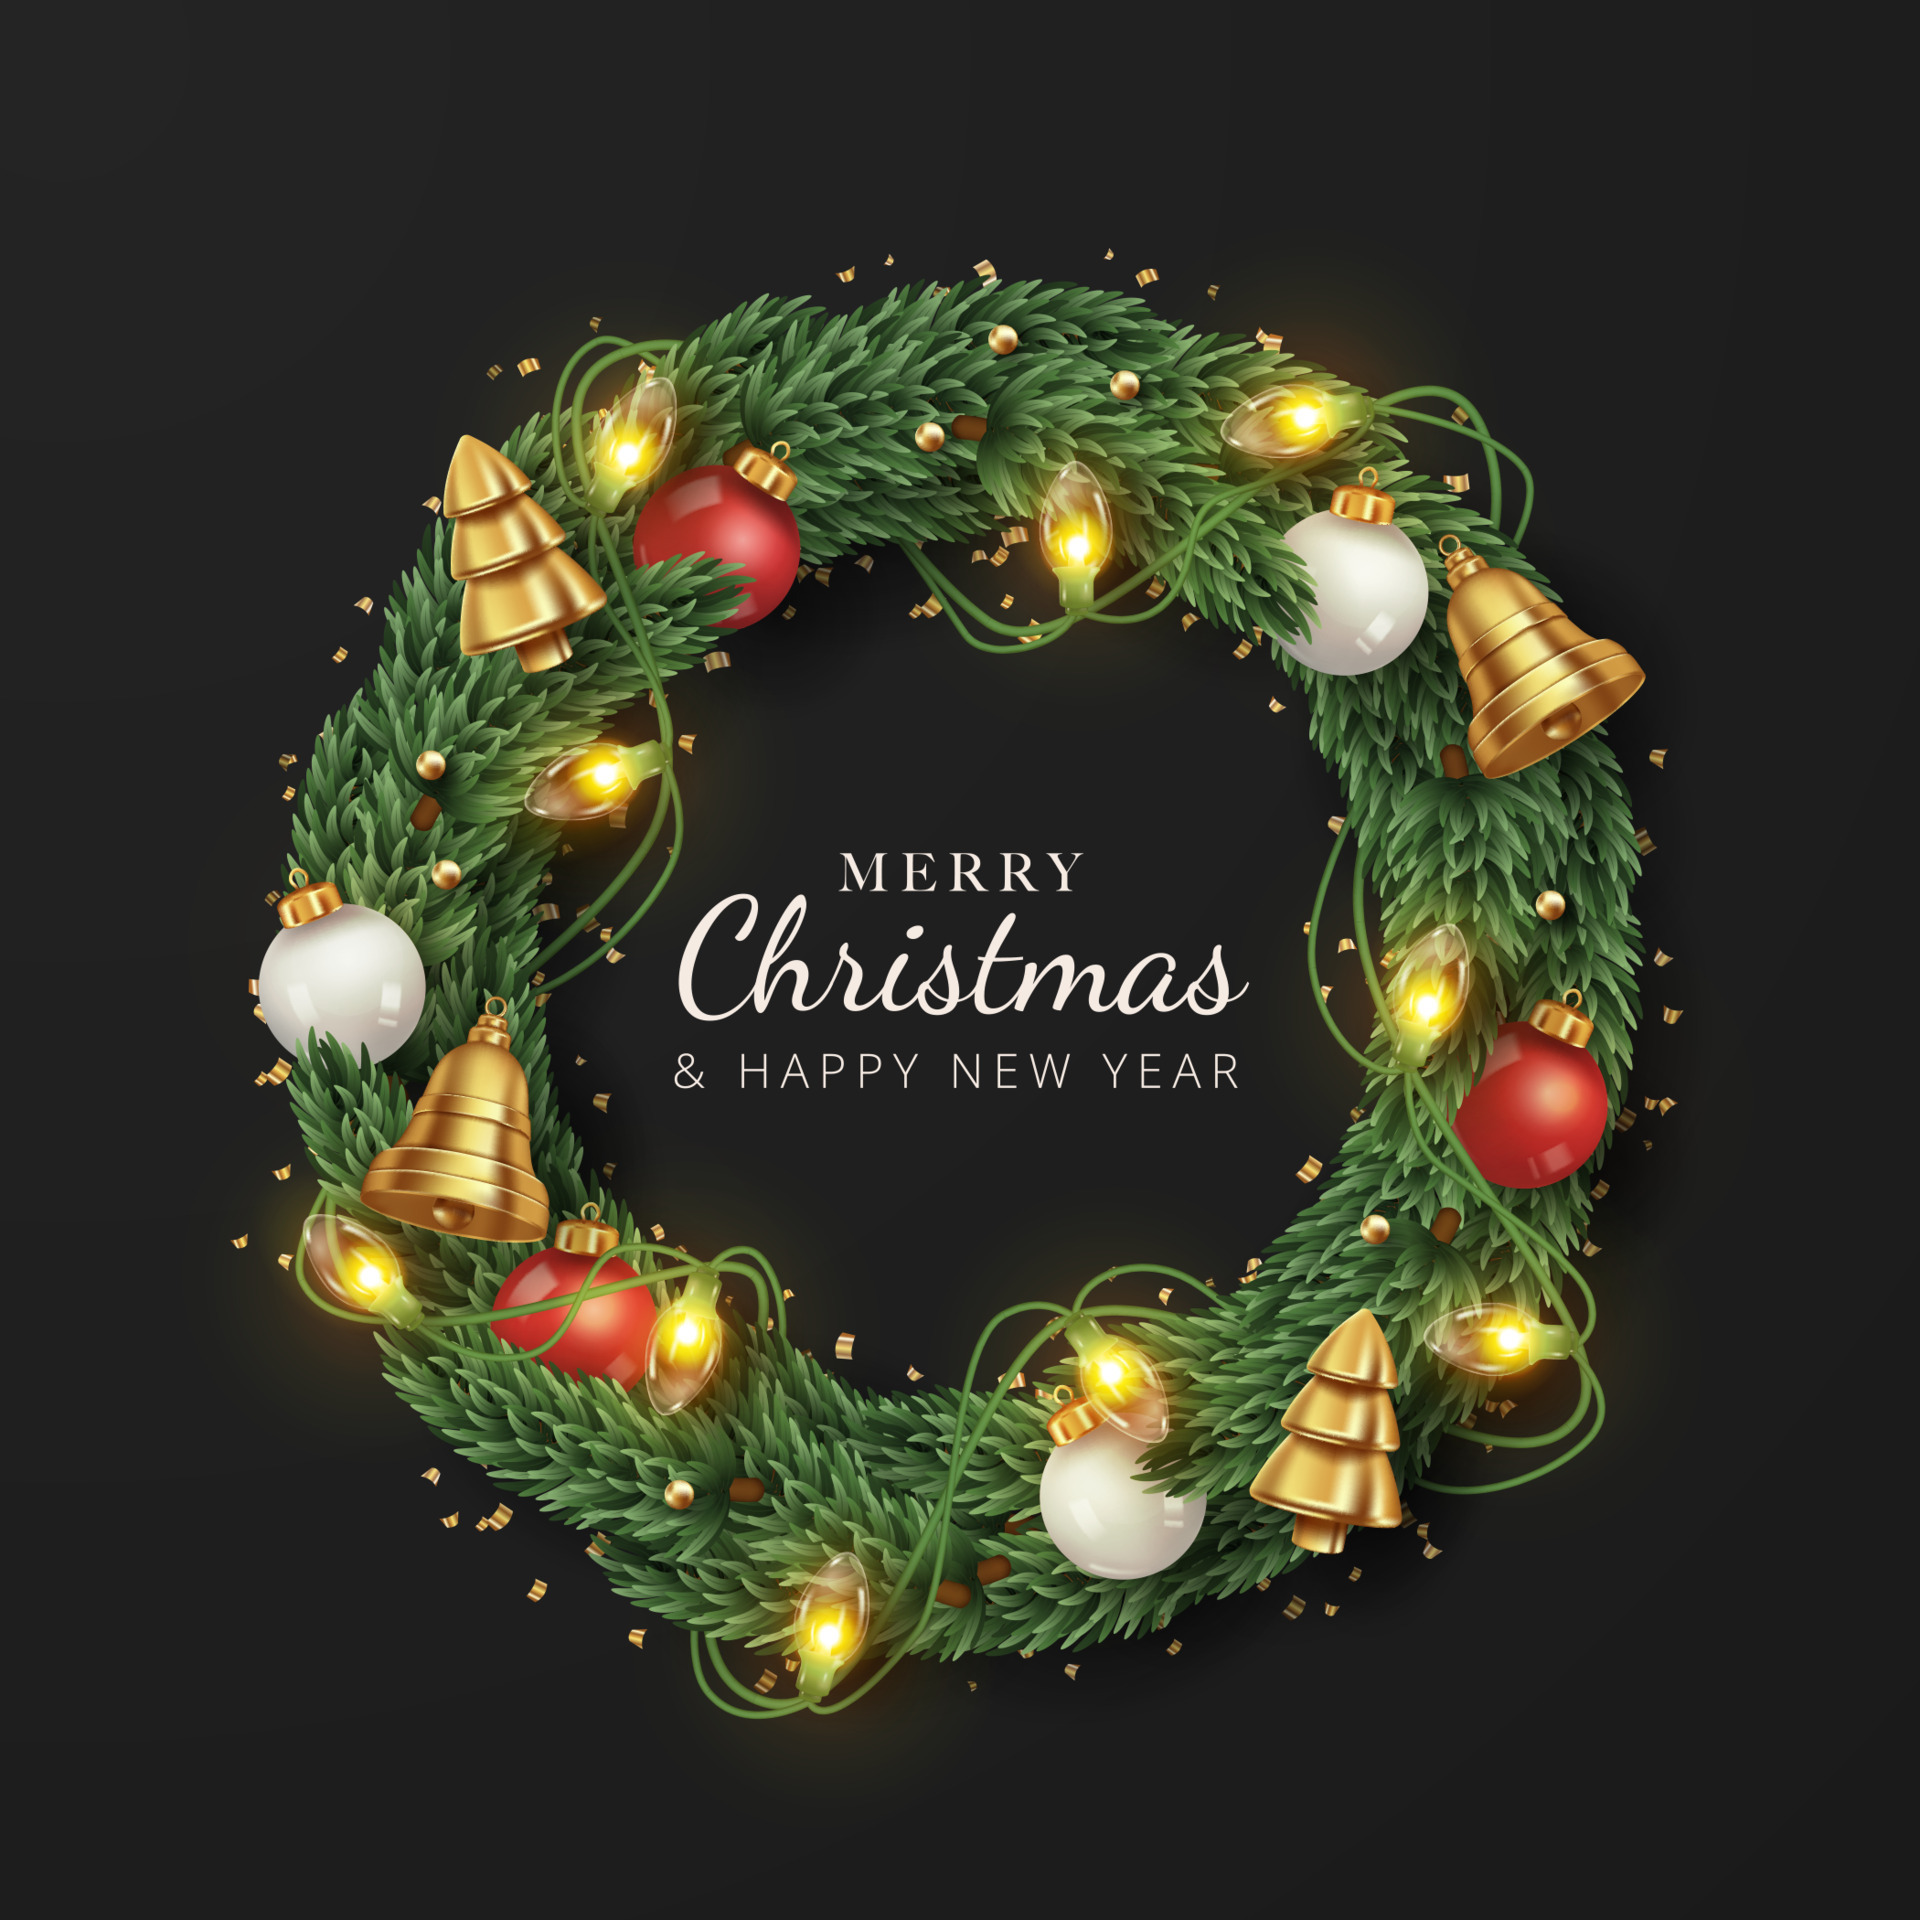 merry-christmas-background-with-realistic-decoration-round-from